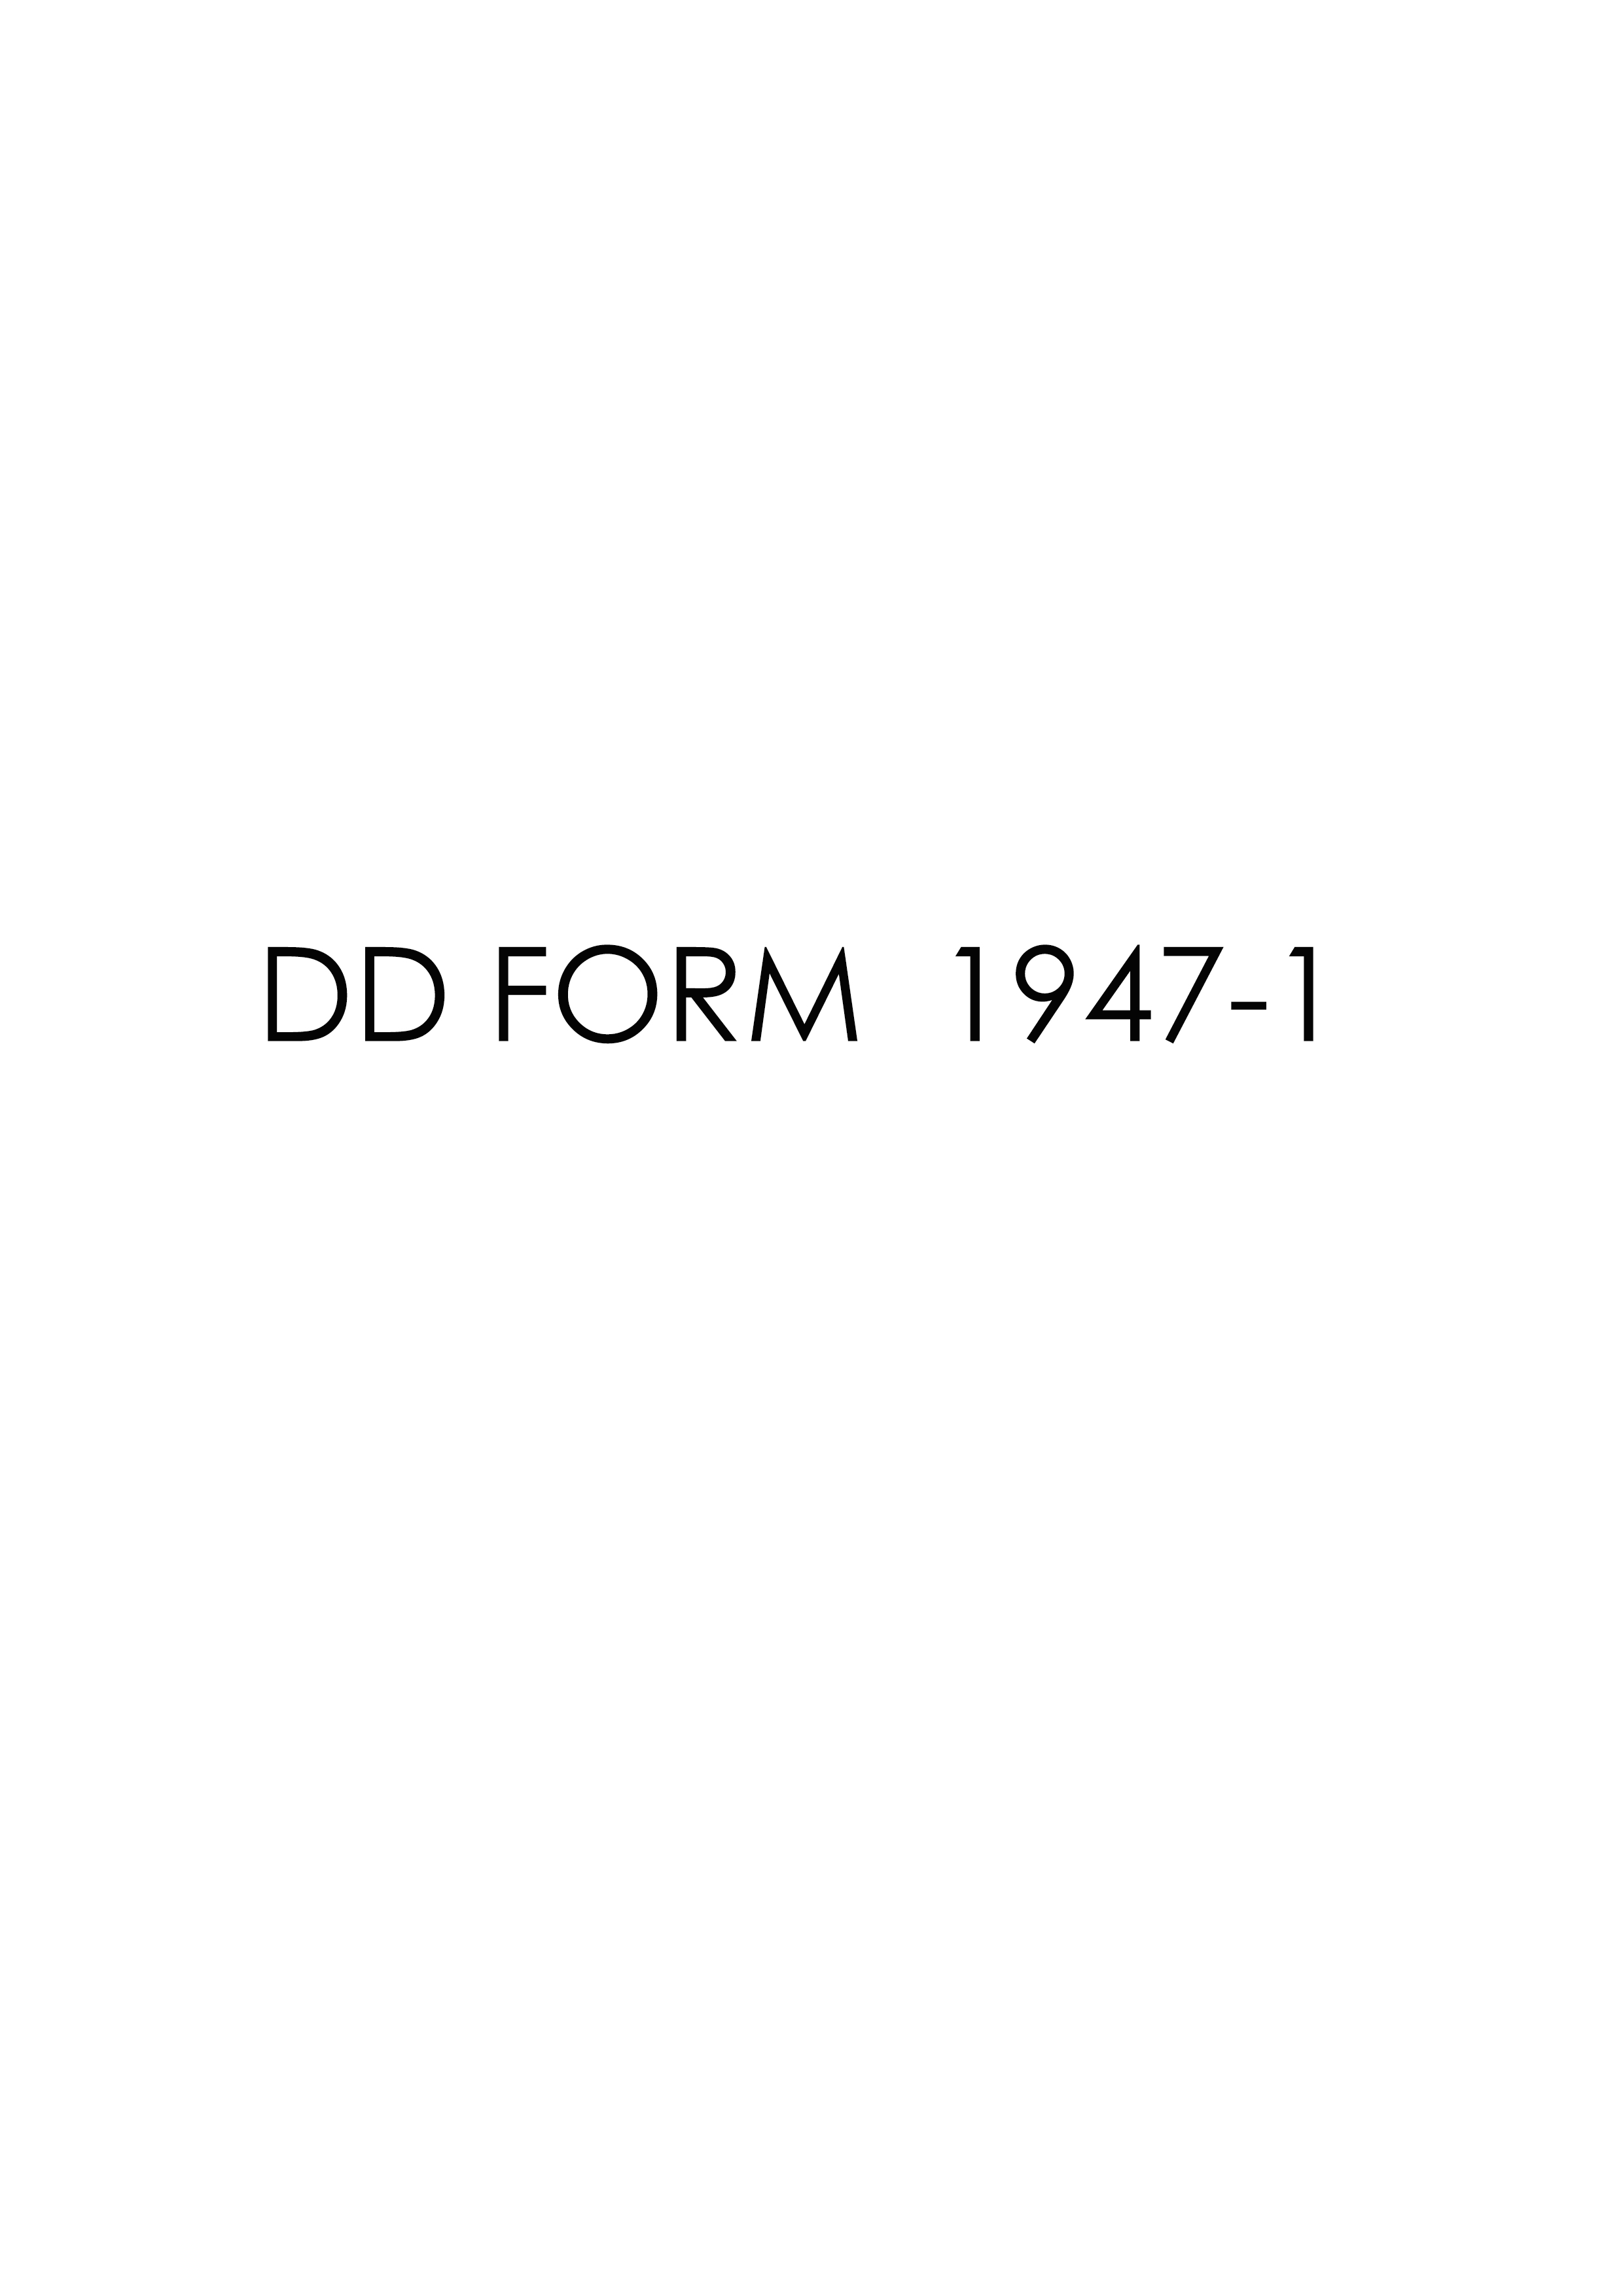 Download Fillable dd Form 1947-1